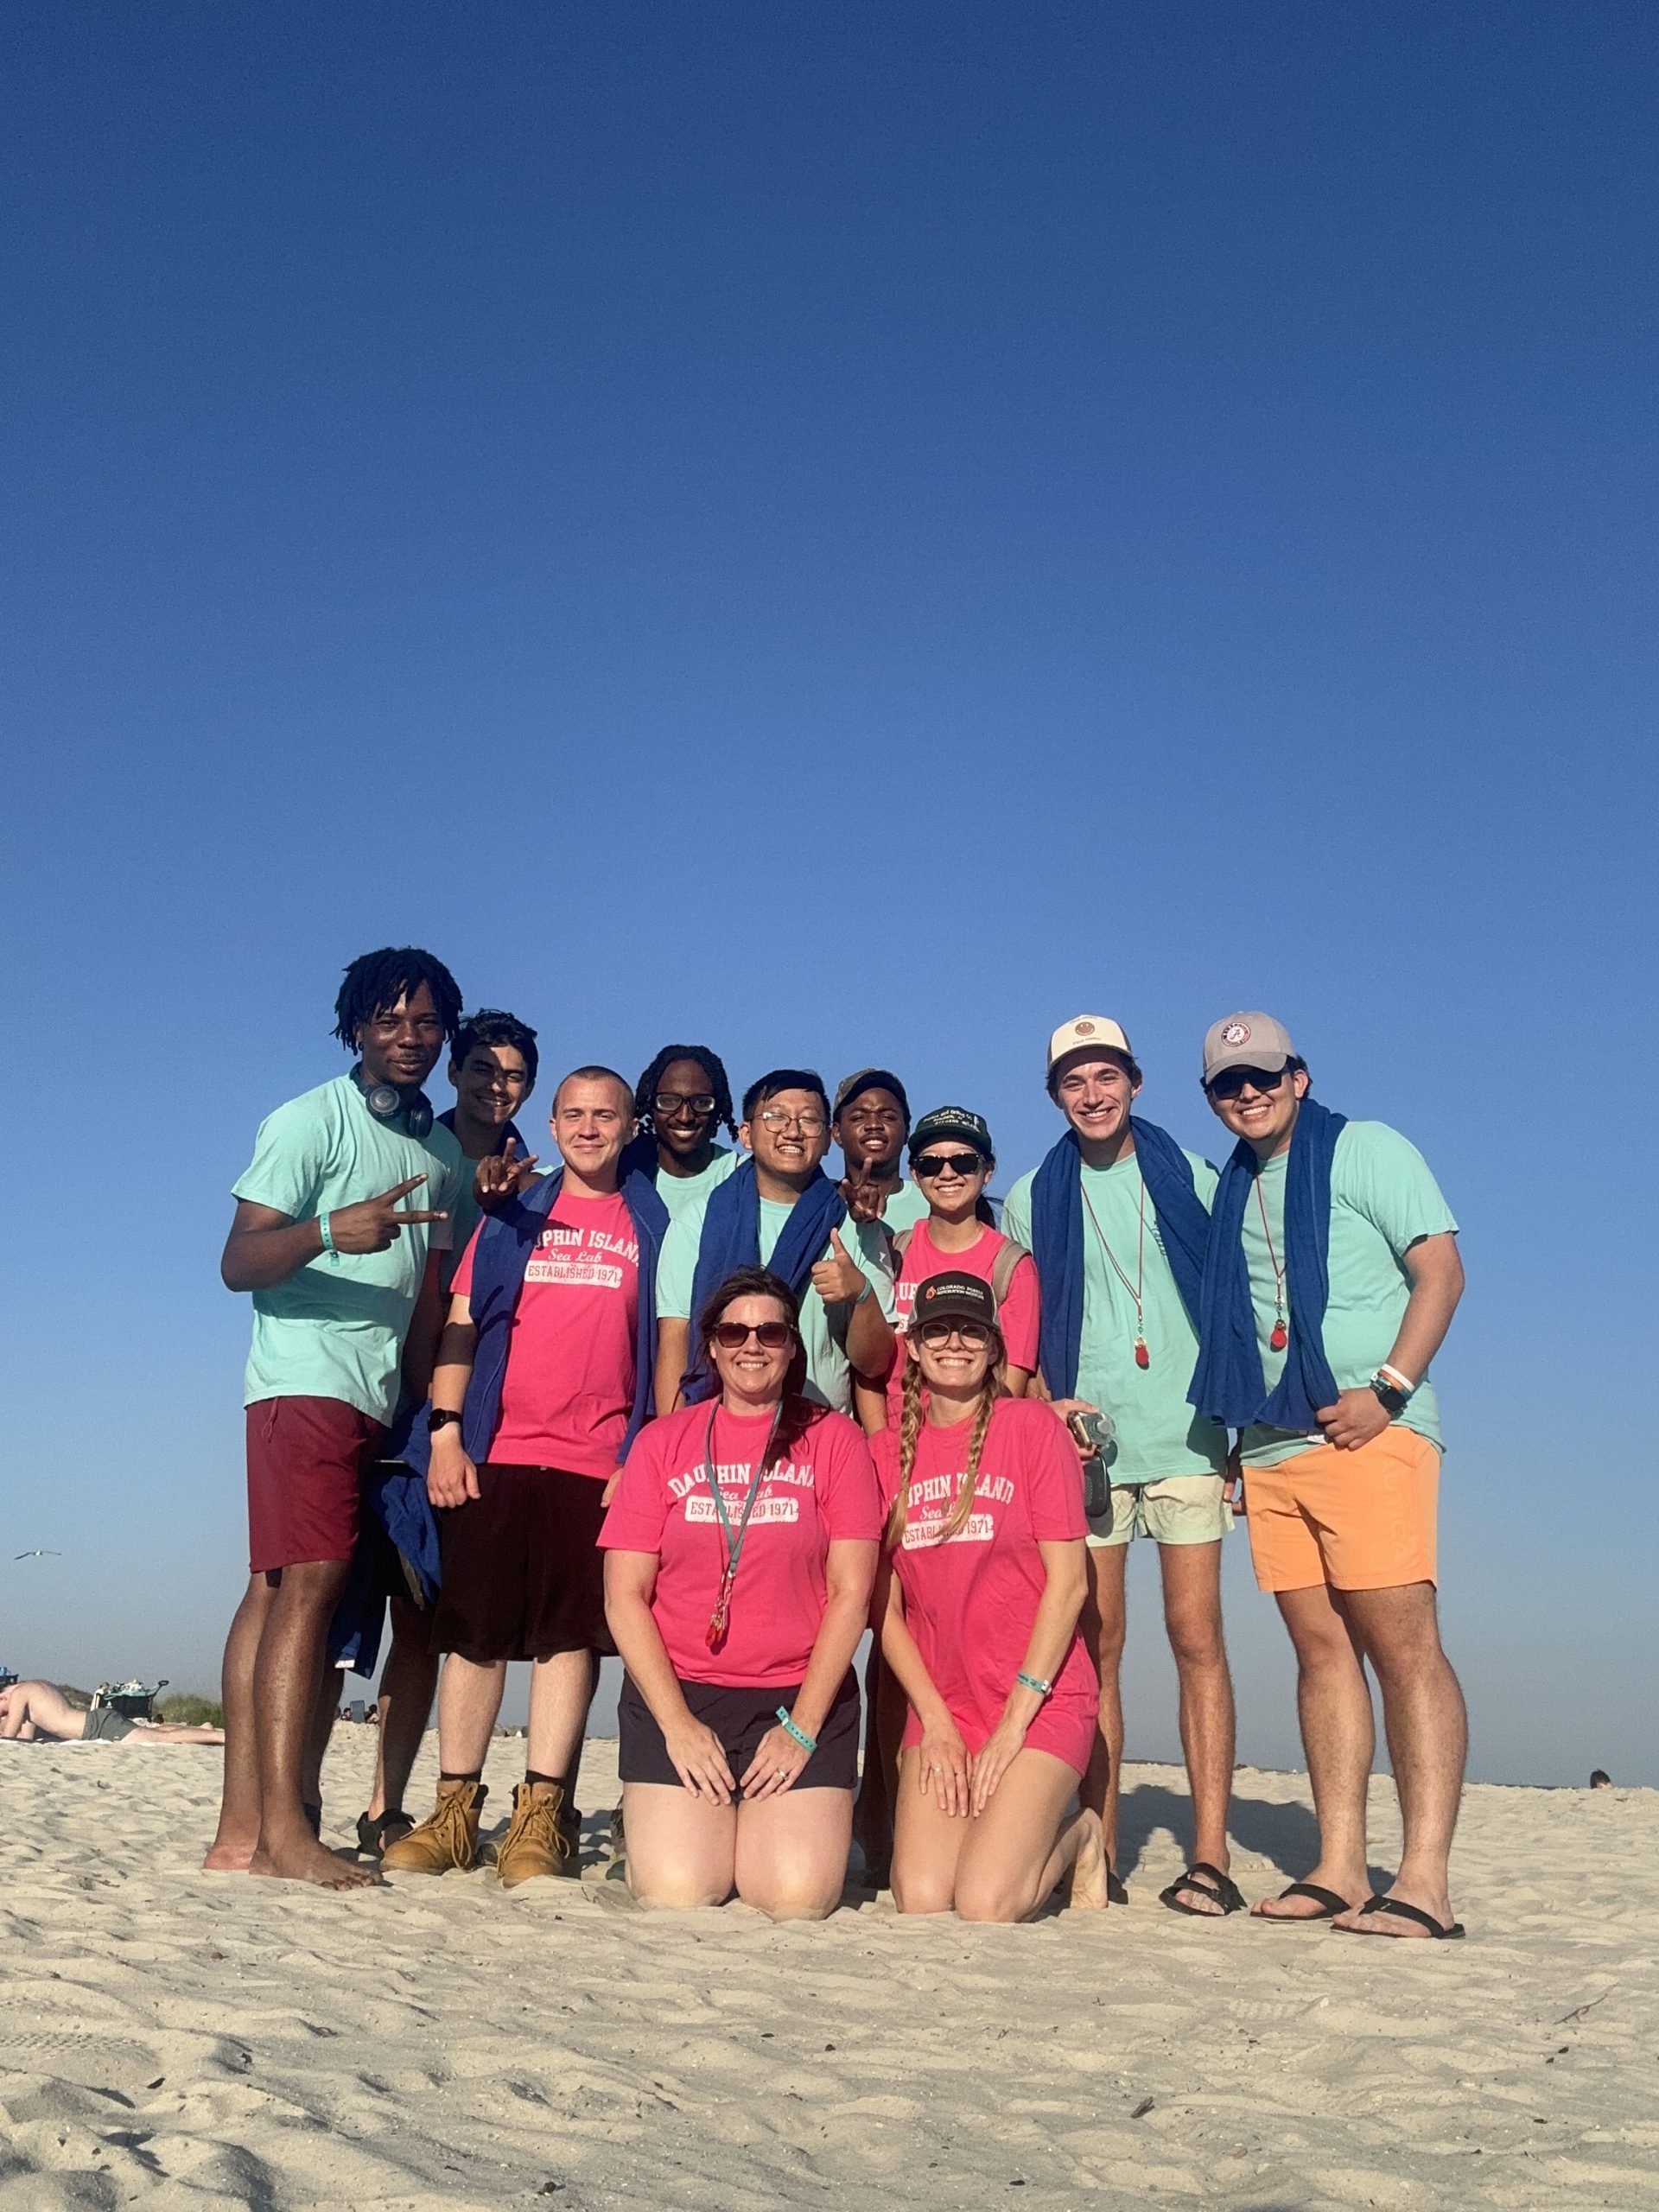 A group of ten people posing on a sandy beach under a clear blue sky. They are participants in the Hydrologic AI Forecasting Program. The group includes both men and women, wearing casual summer clothing in shades of turquoise and pink. Two women are kneeling in the front row, while the rest of the group stands behind them. Everyone is smiling, and some are wearing sunglasses. The background shows a few beachgoers and the expansive sky.